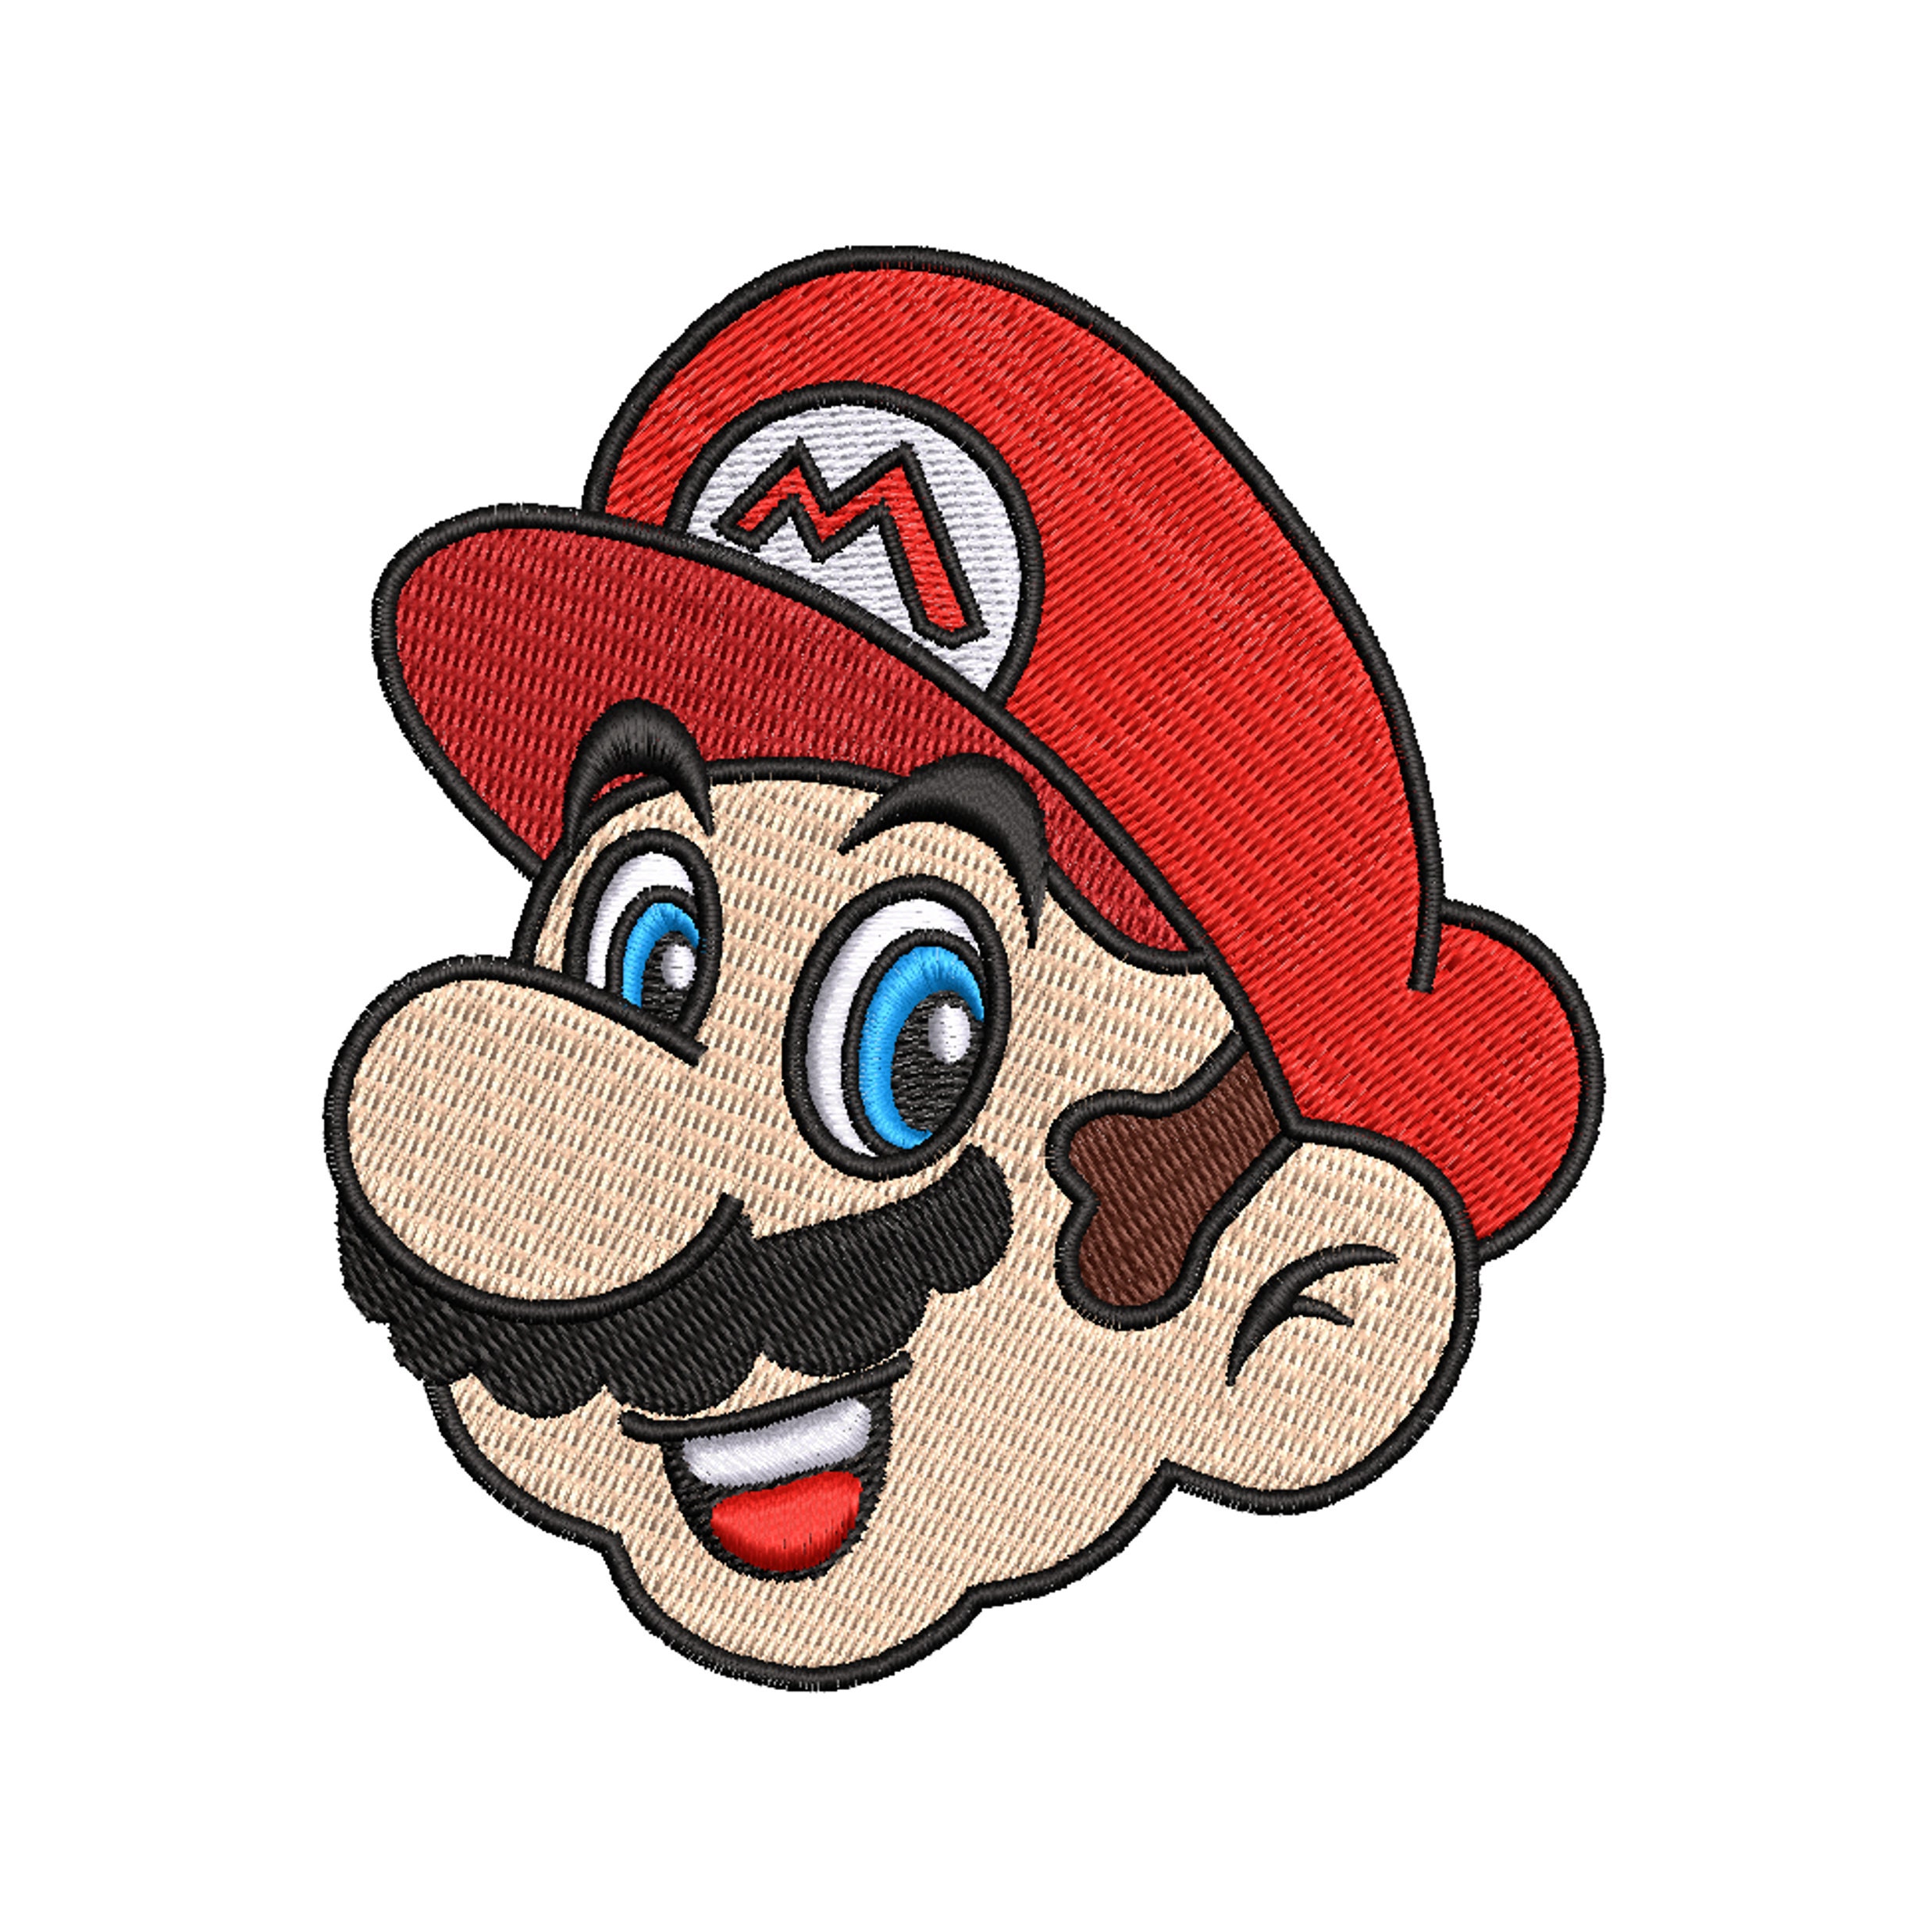 Embroidery Super Mario Odyssey - A.G.E Store anime game embroidery